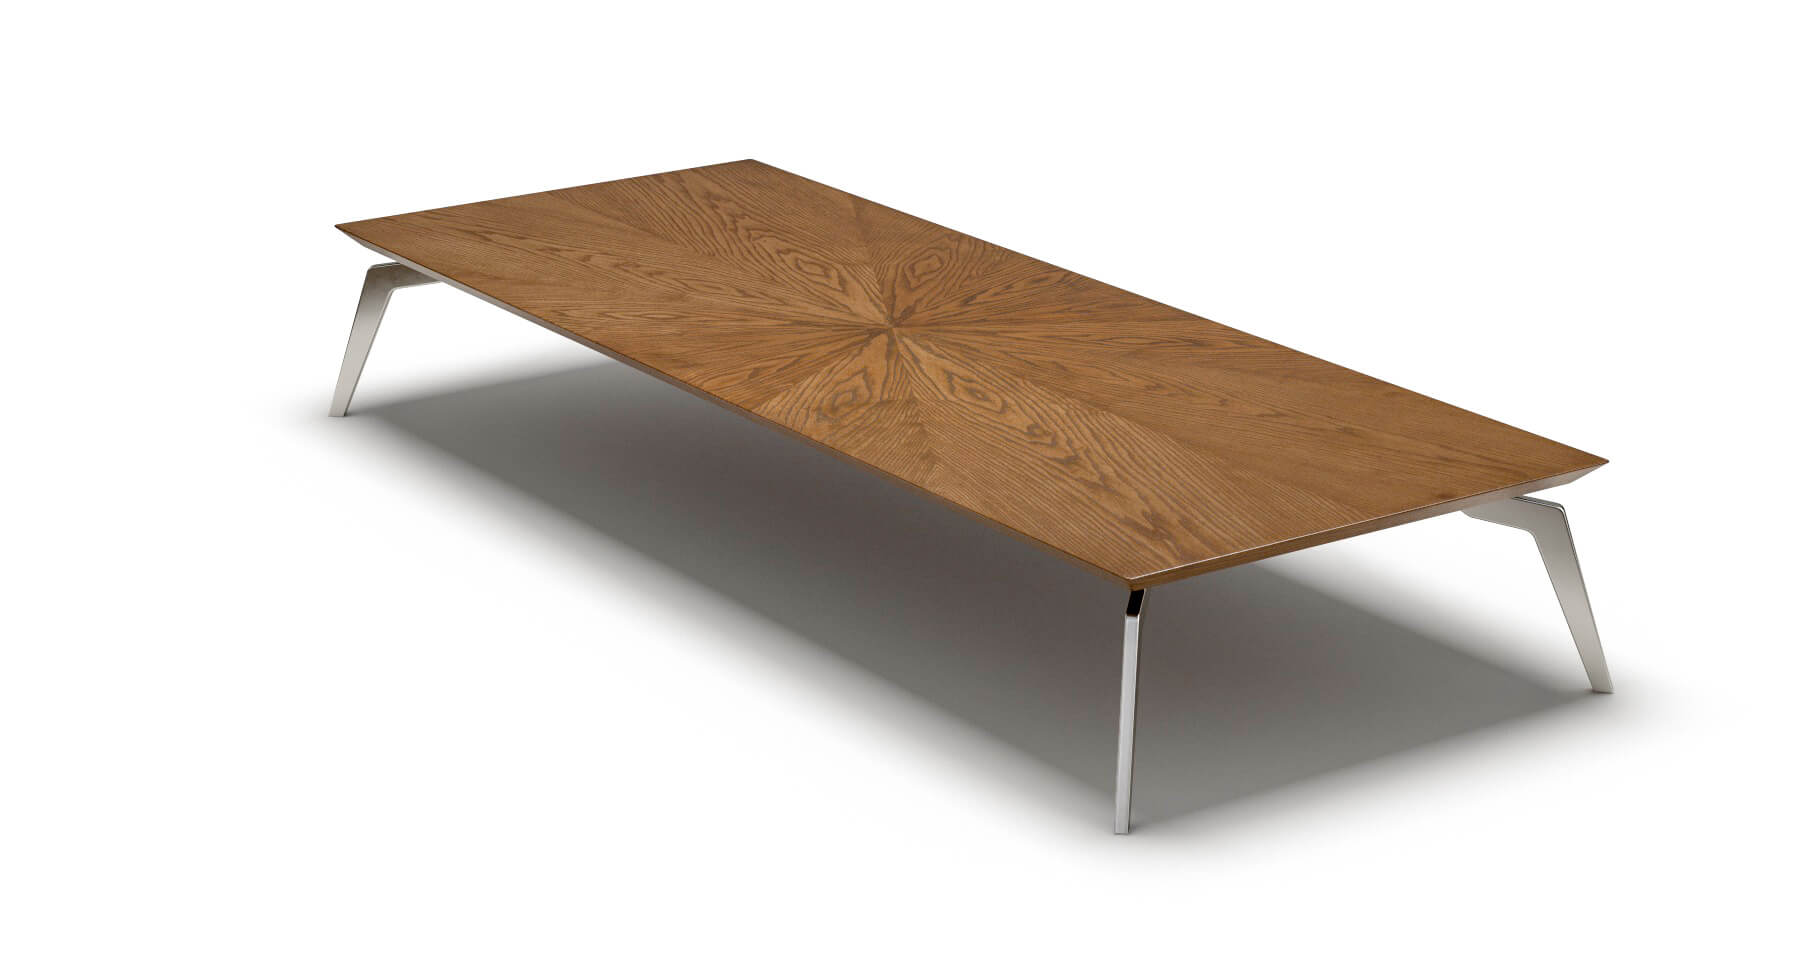 Lungo table